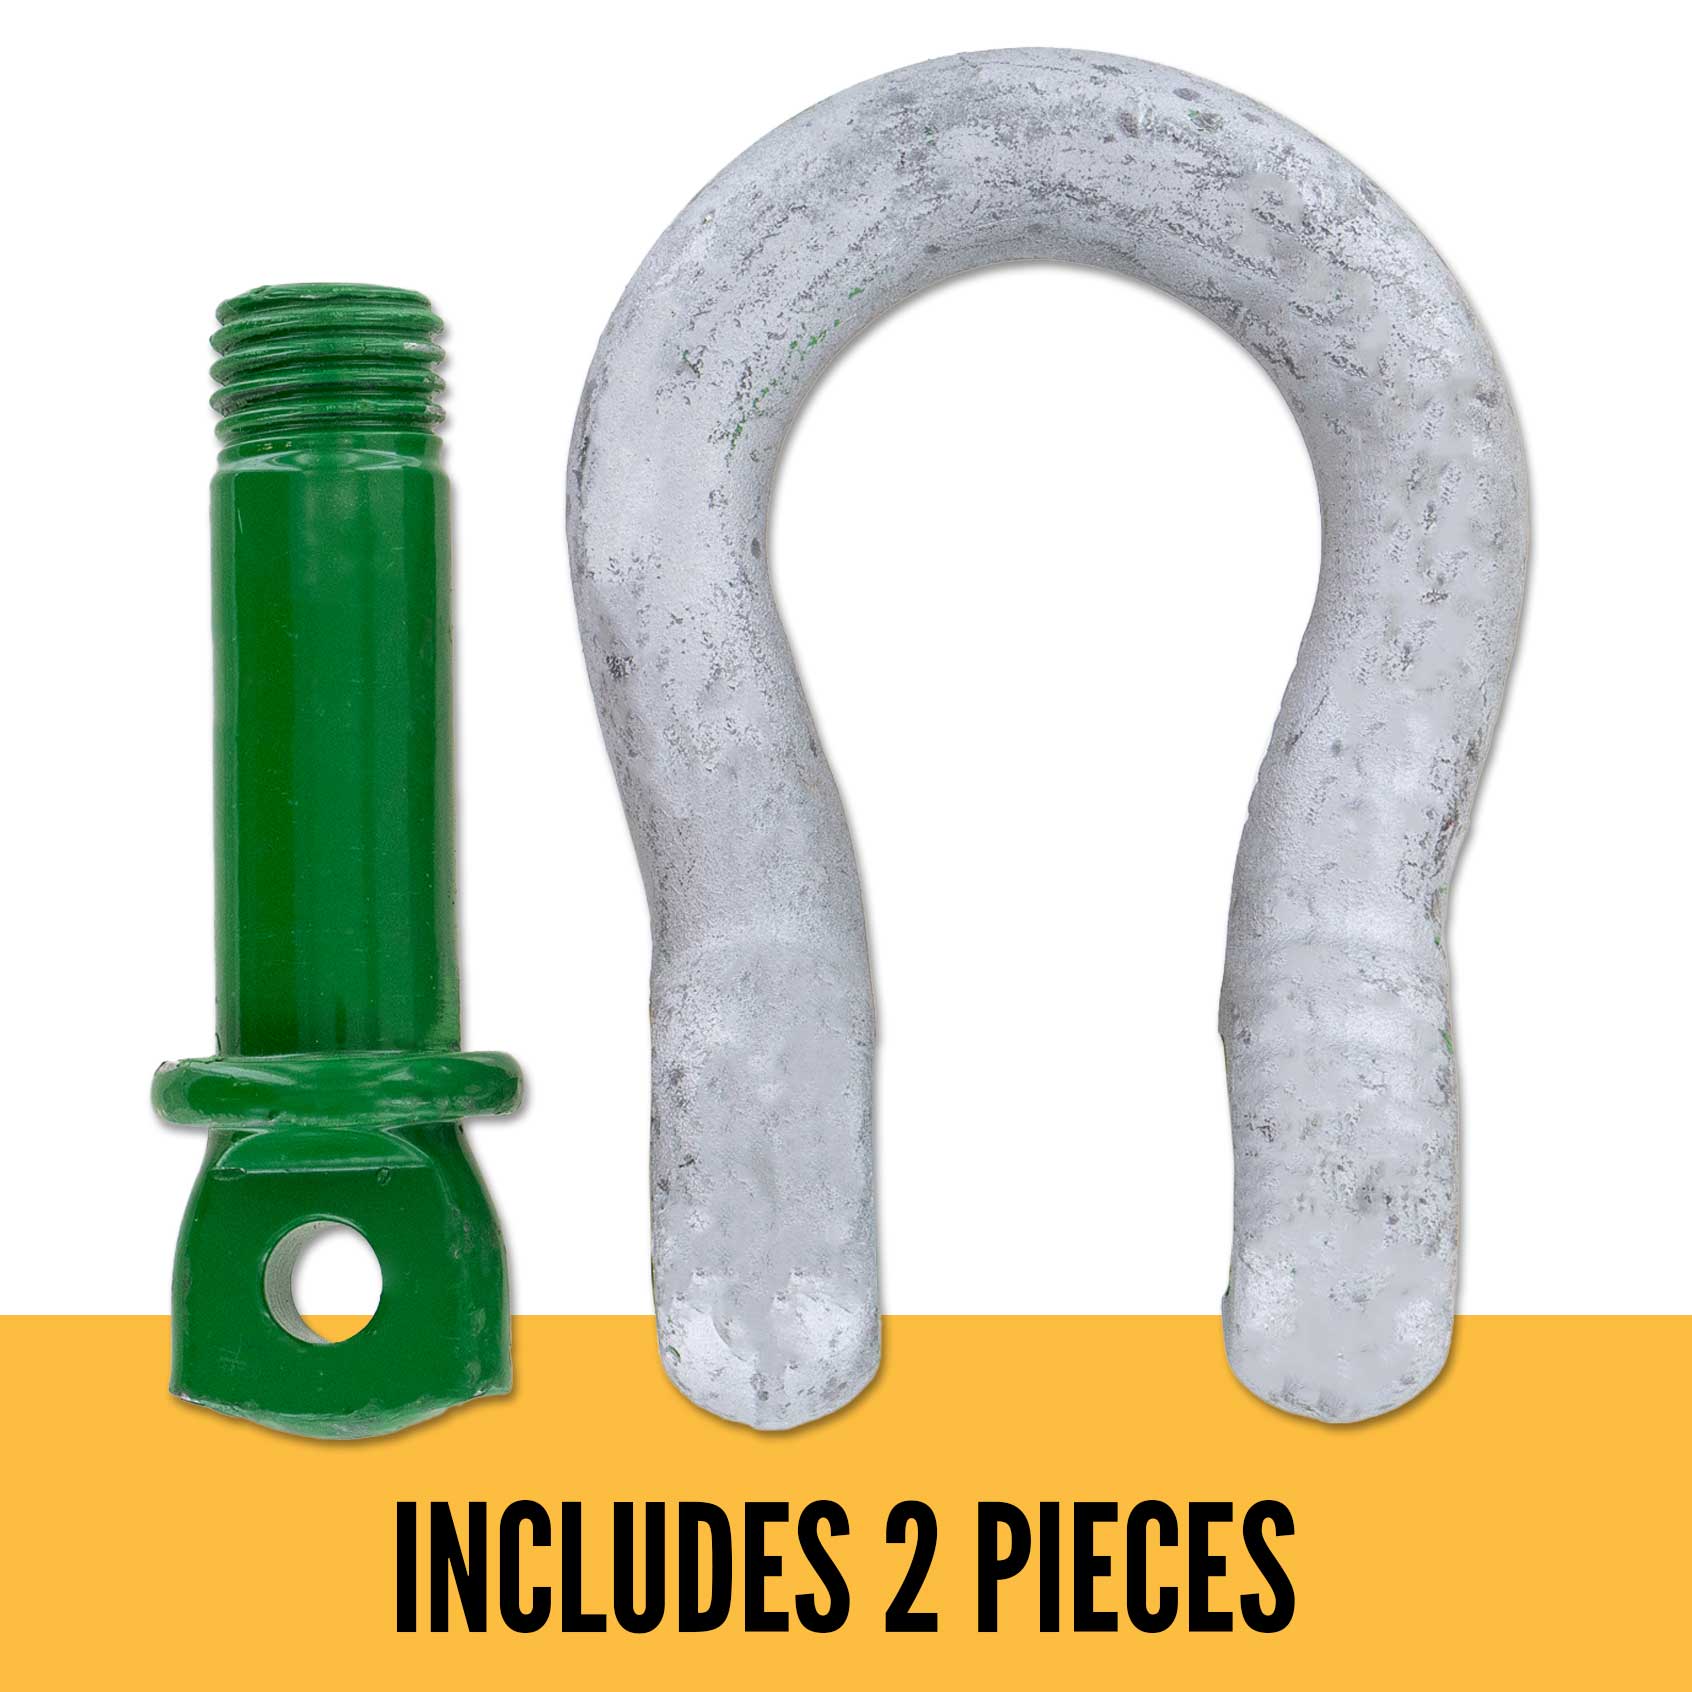 2-1/2" Van Beest Green Pin® Screw Pin Anchor Shackle | G-4161 - 55 Ton parts of a shackle